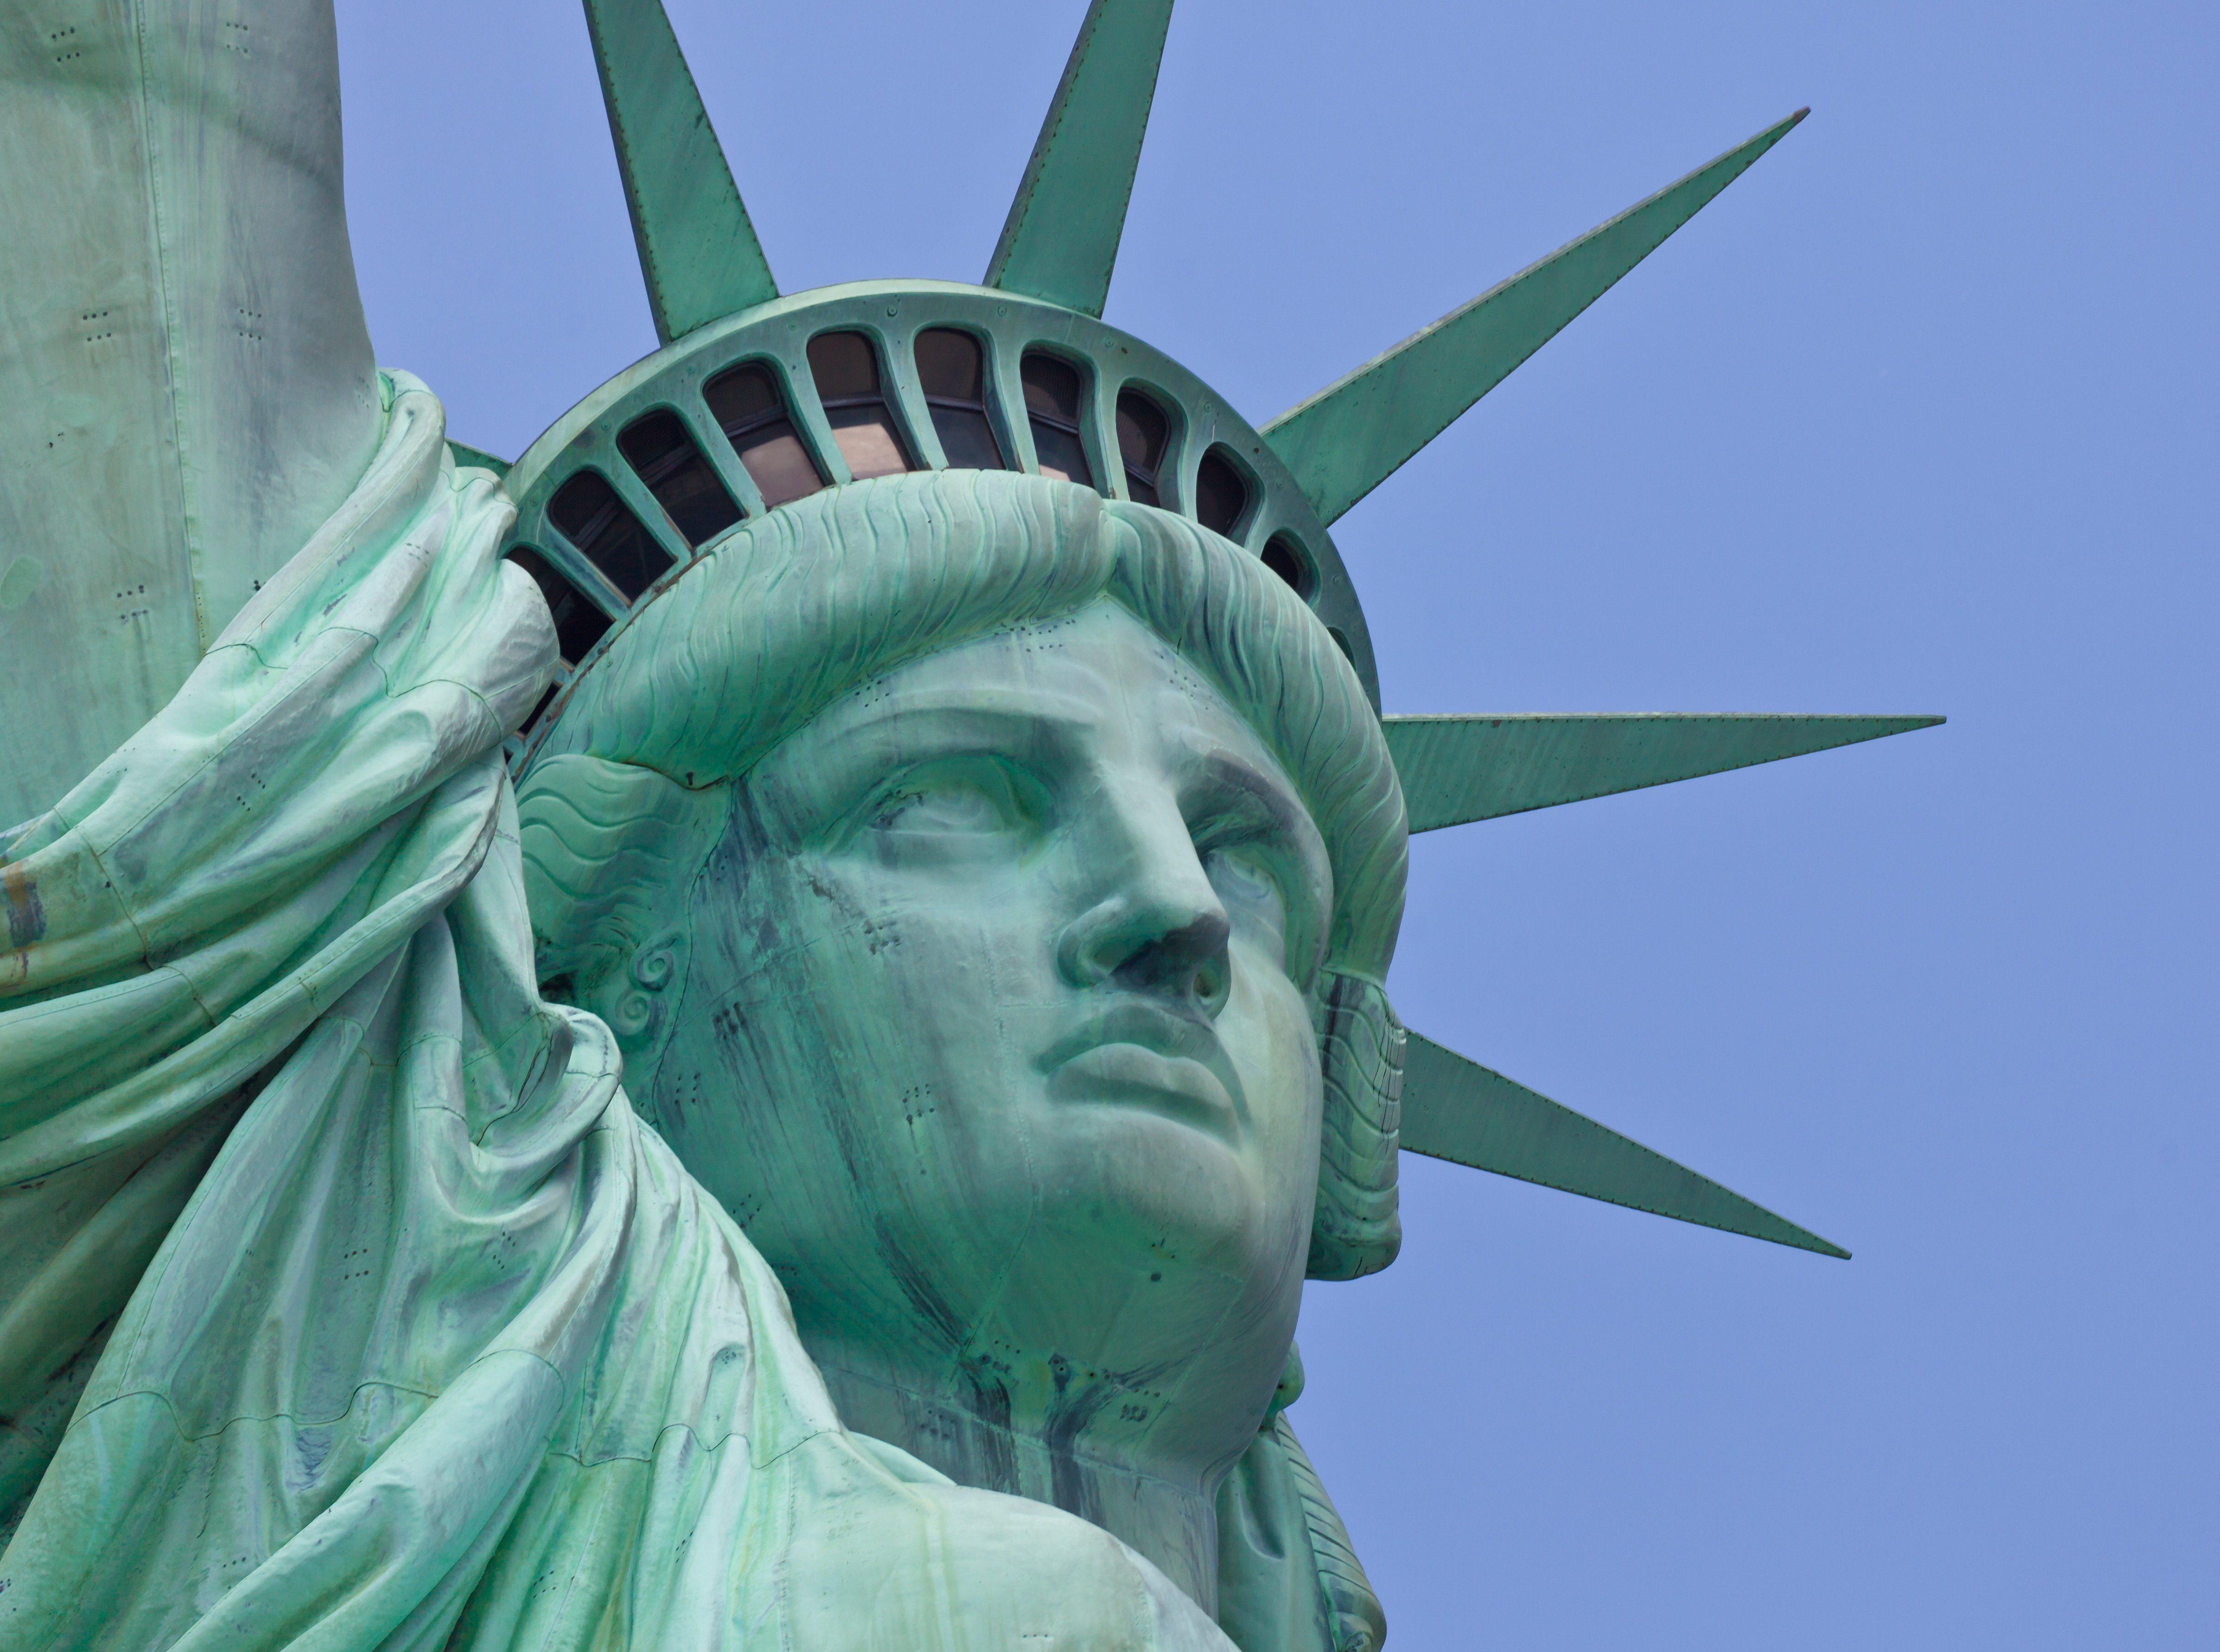 Statue of Liberty is designed after a Muslim woman